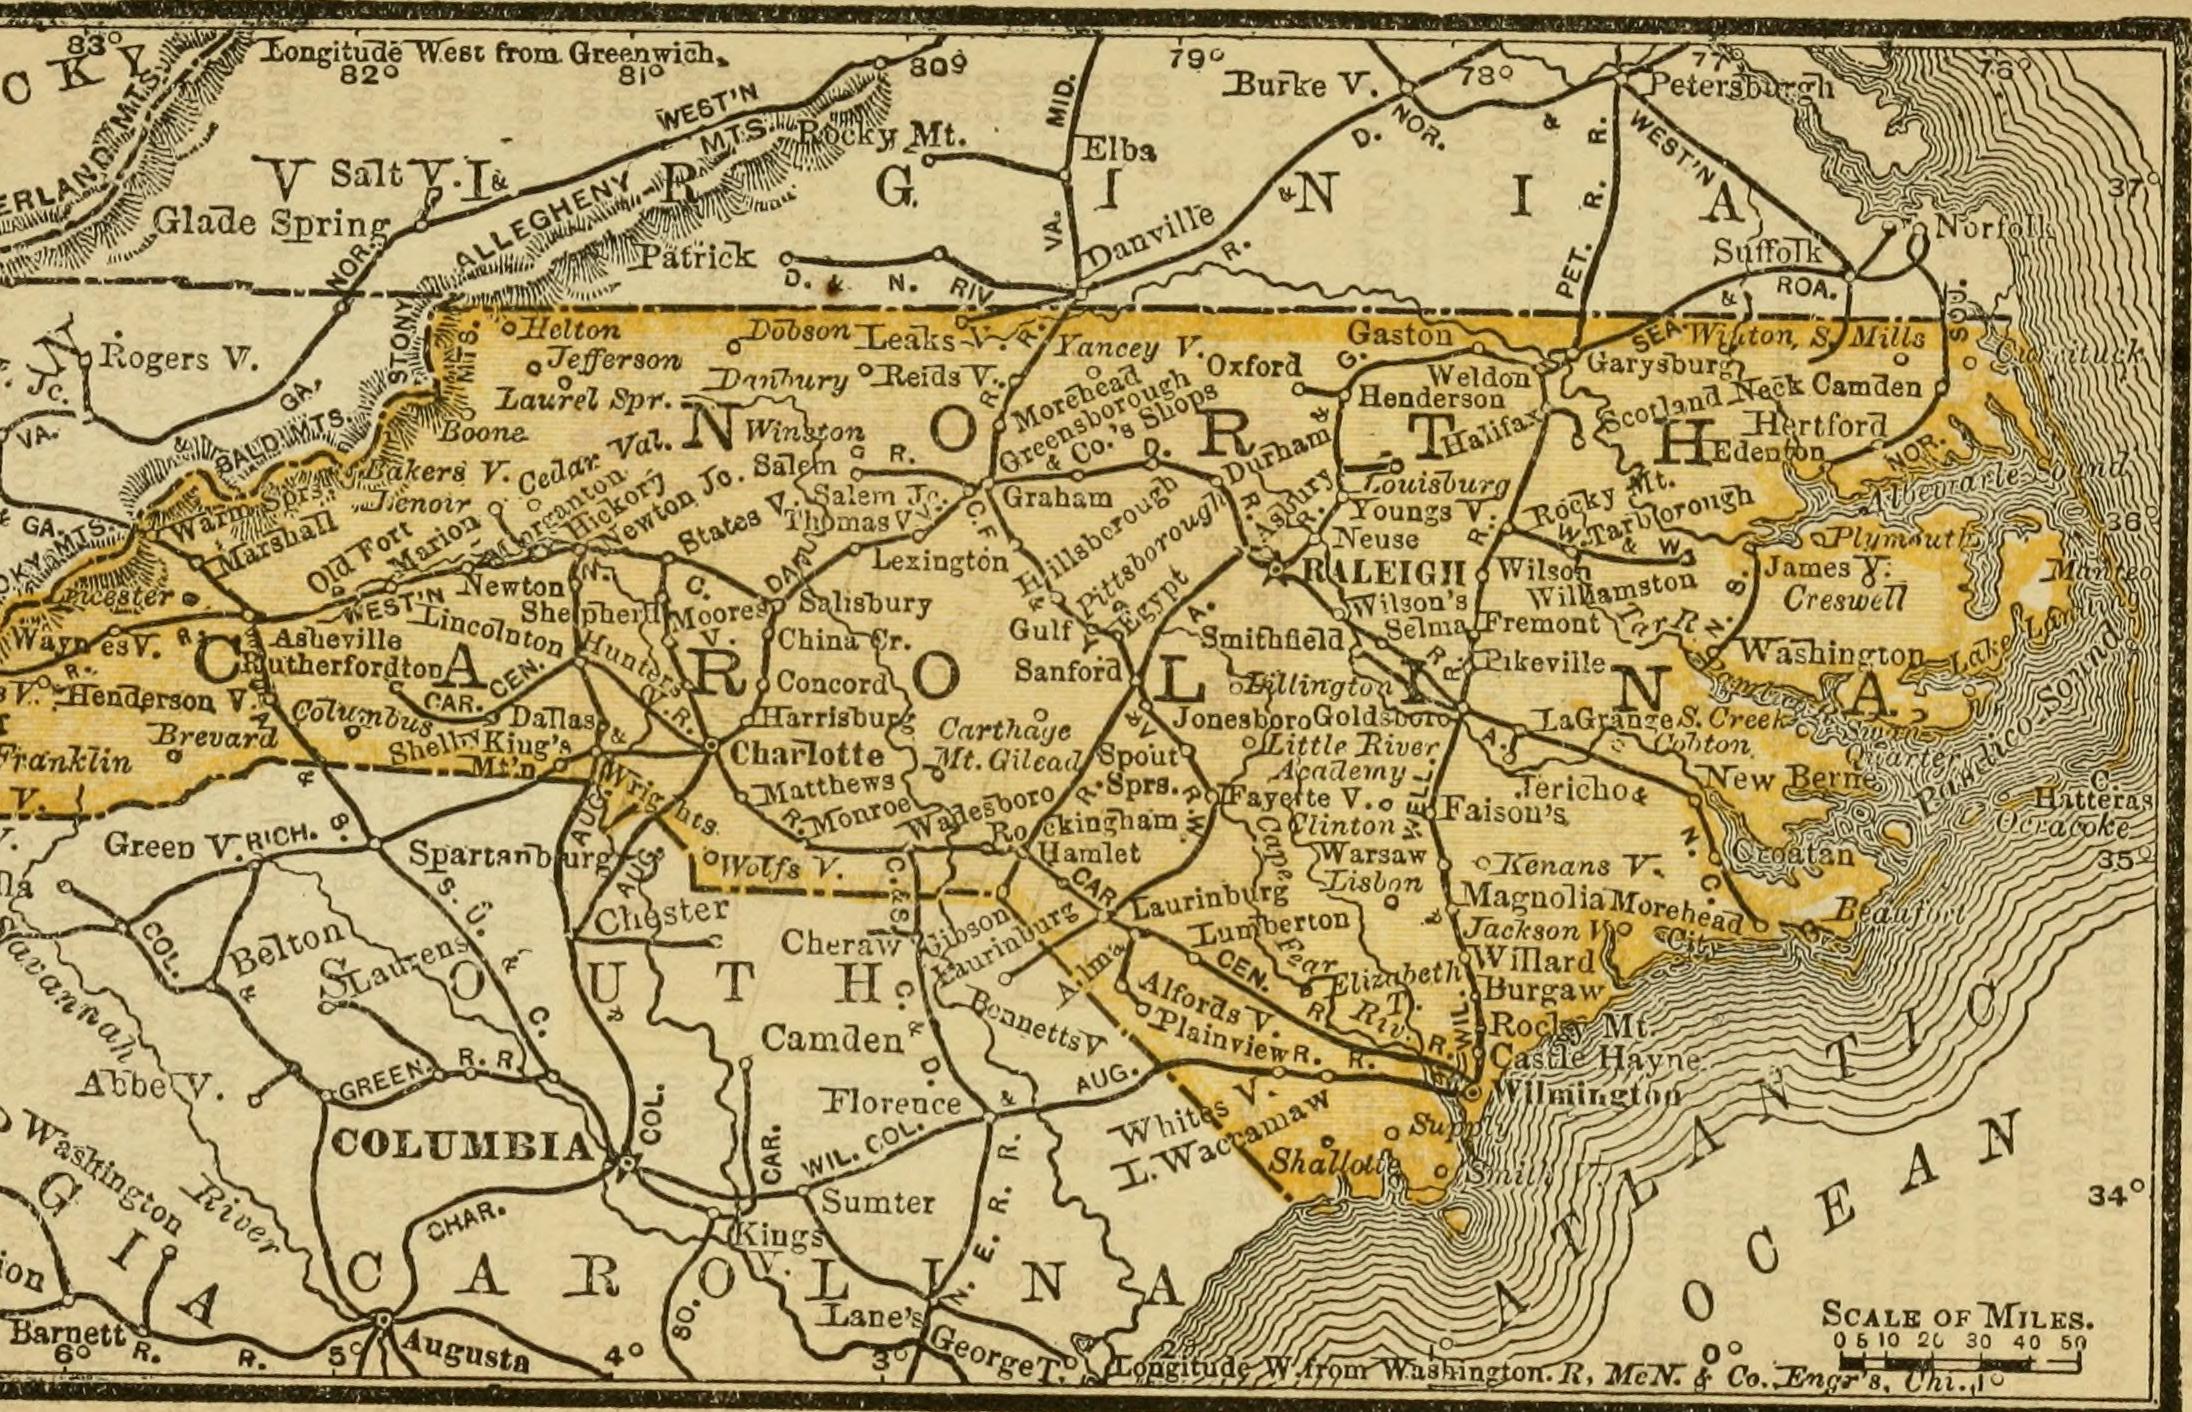 Searching for Mira: The enduring legacy of slavery and brutality in the South 